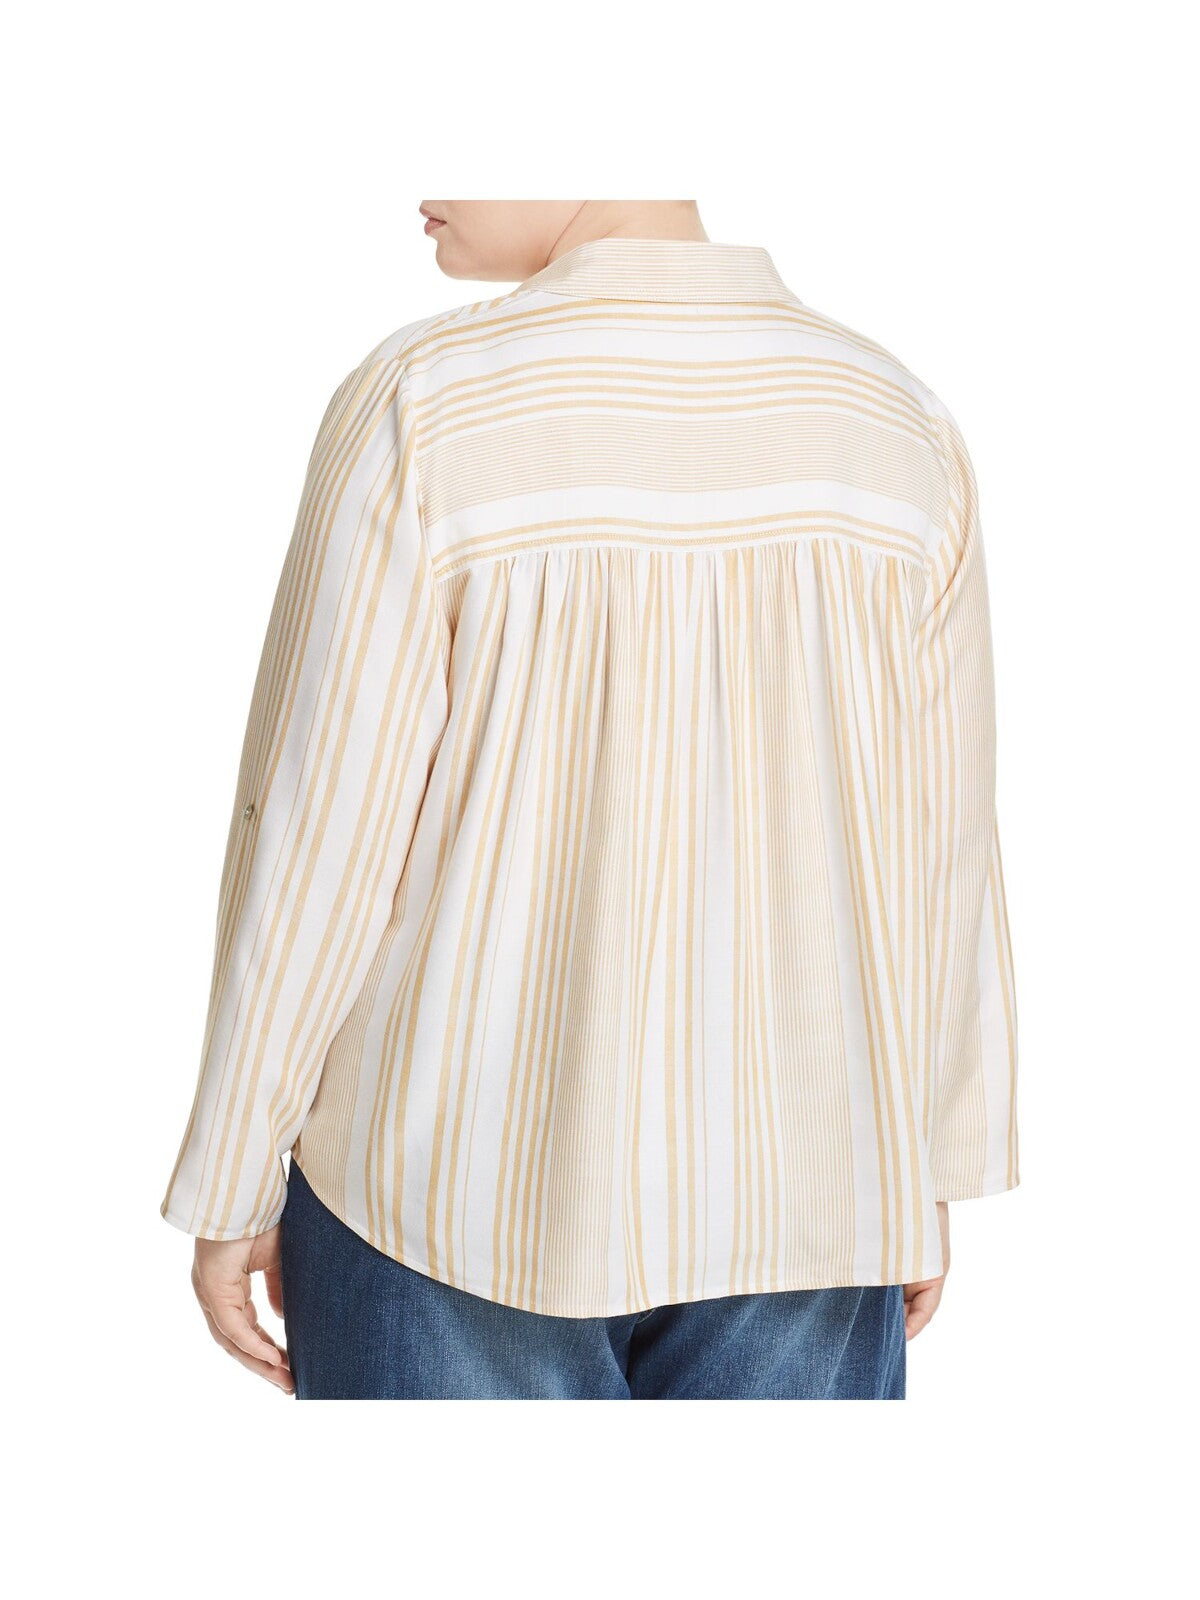 CUPIO BLUSH Womens Ivory Pleated Curved Hem Striped Roll-tab Sleeve Collared Button Up Top Plus 3X